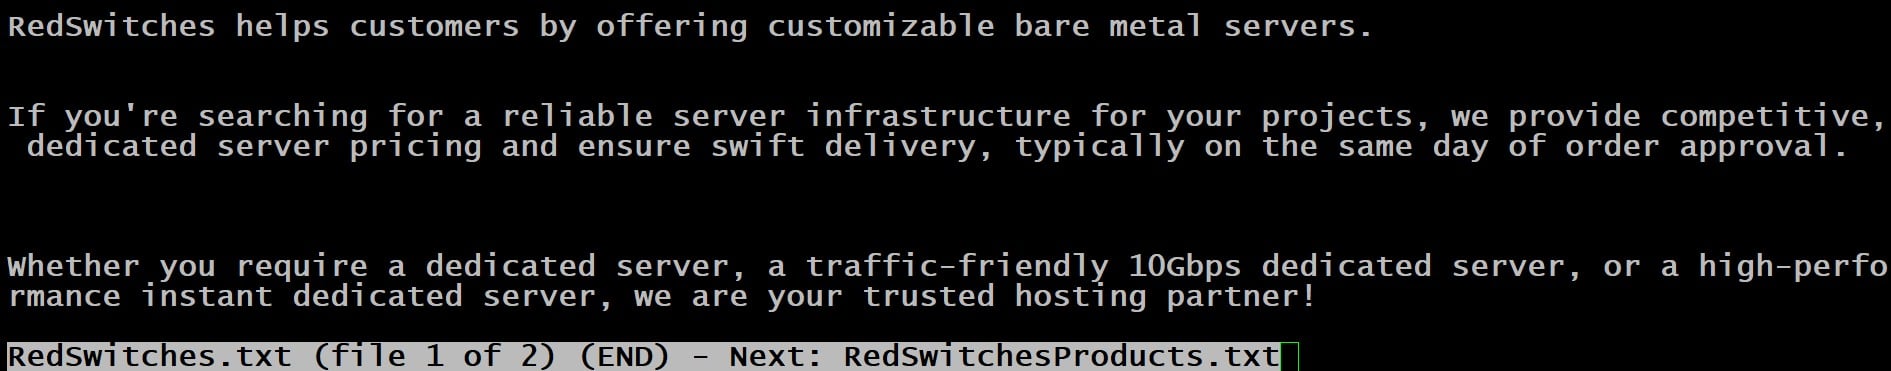 # less RedSwitches.txt RedSwichesProducts.txt